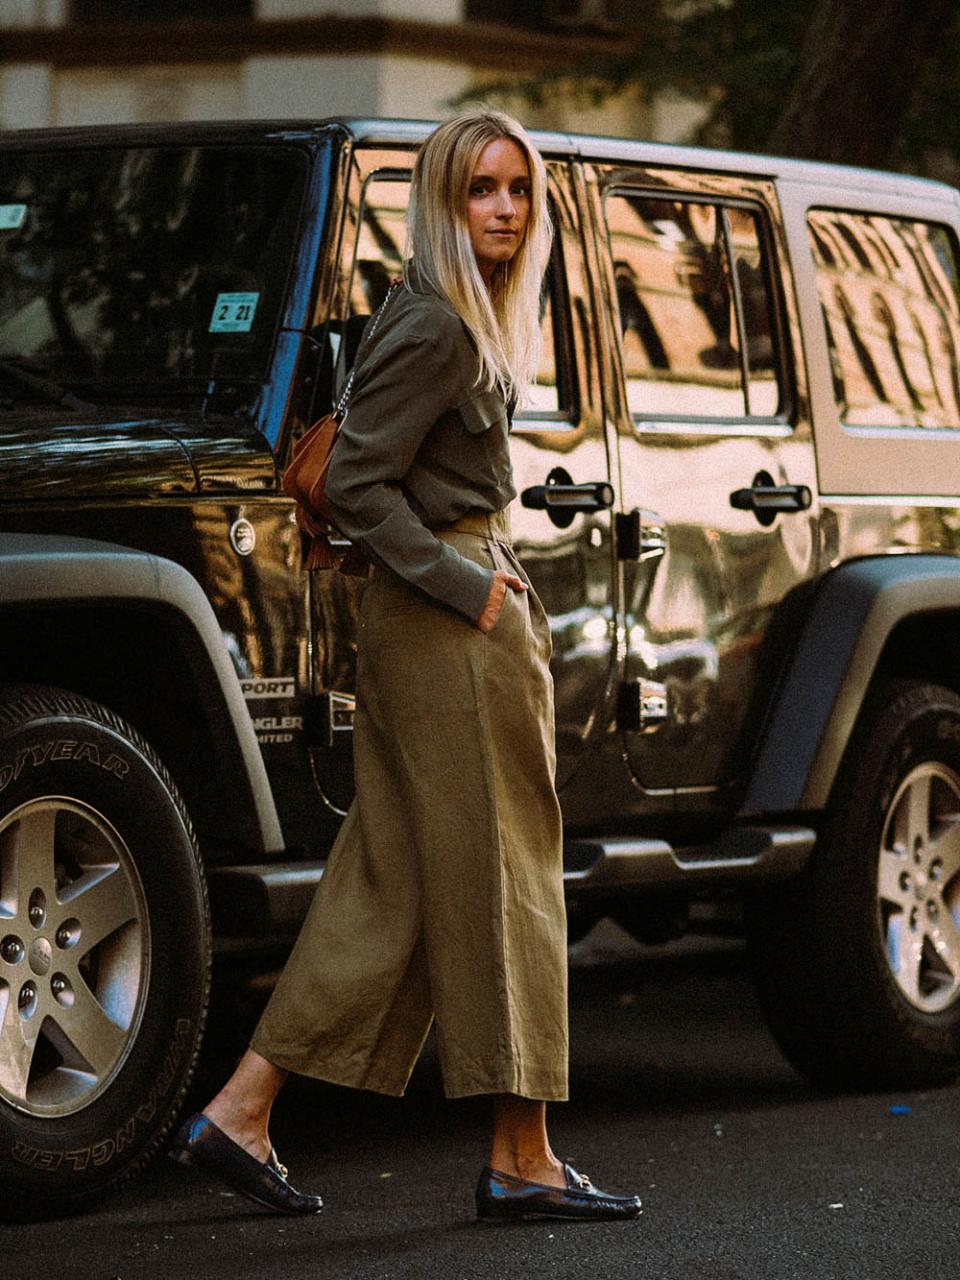 90s Safari Vogue style by Charlotte Groeneveld from Thefashionguitar